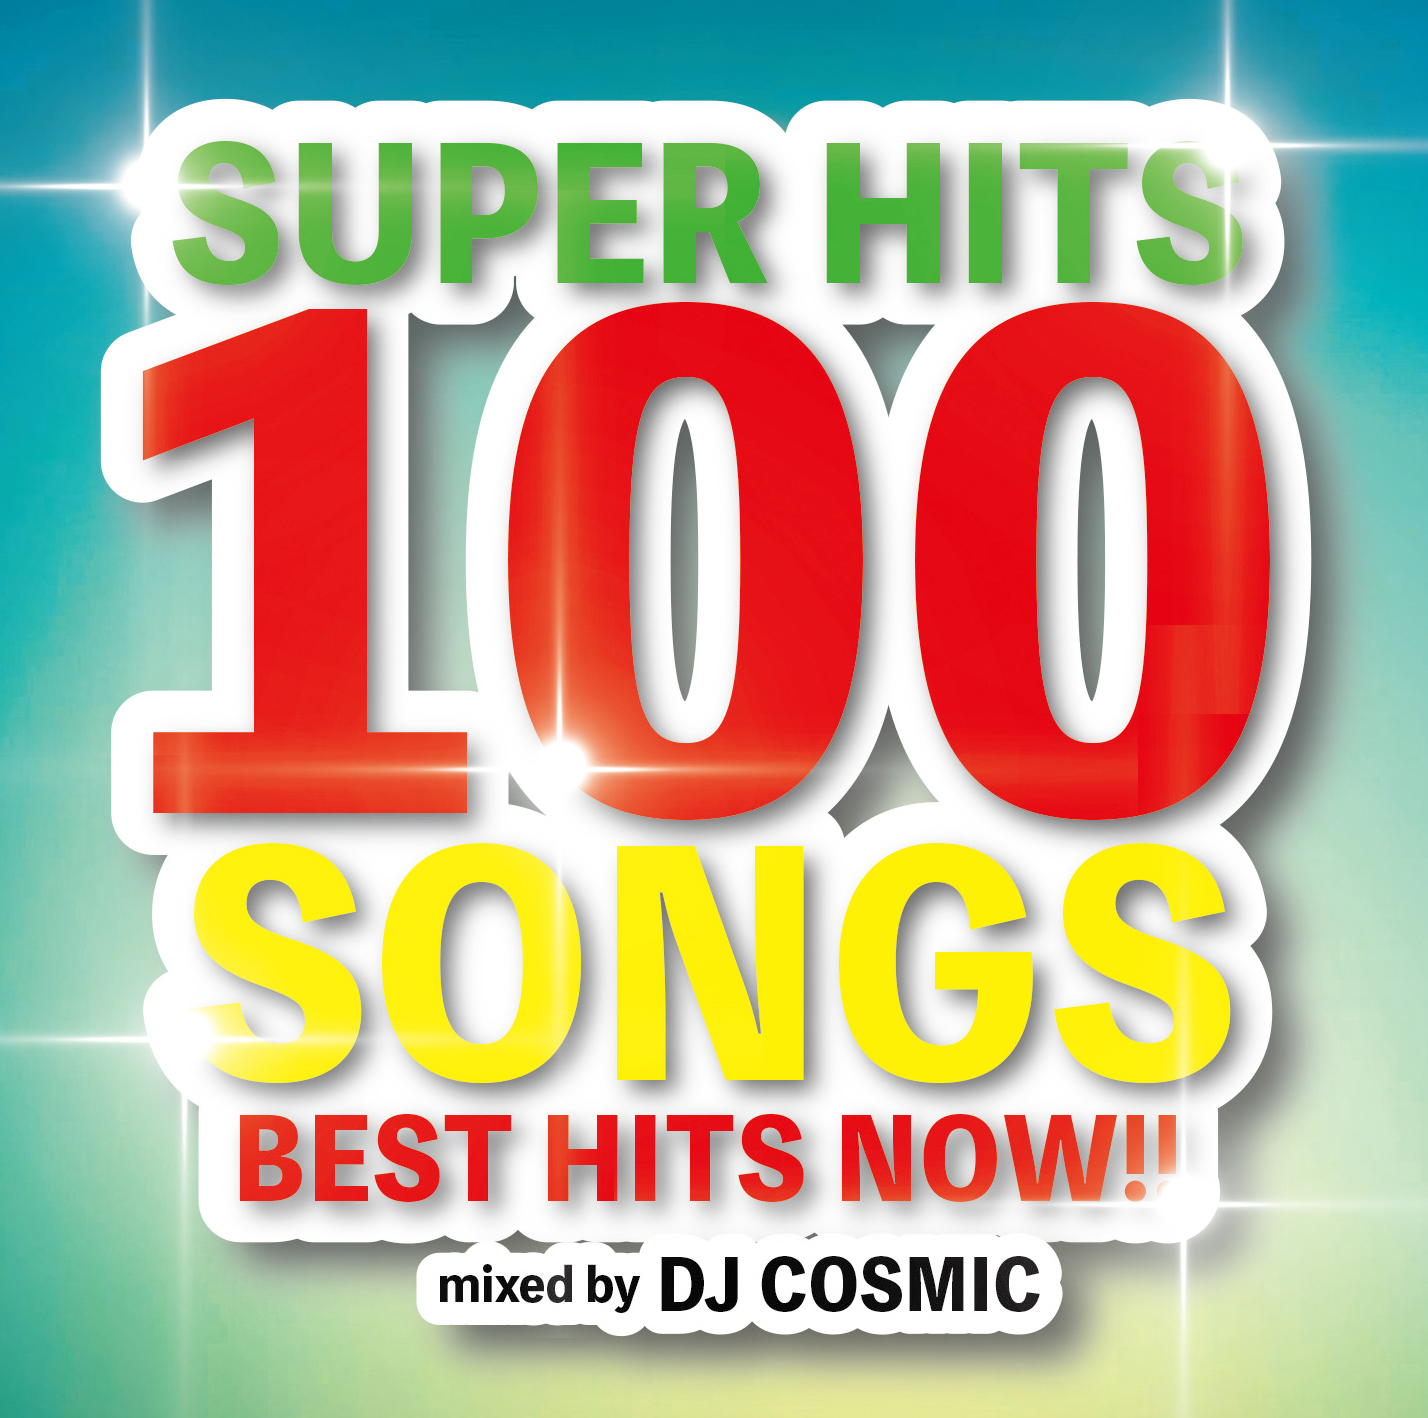 SUPER HITS 100 SONGS -BEST HITS NOW！！ Mixed by DJ COSMIC/DJ COSMIC